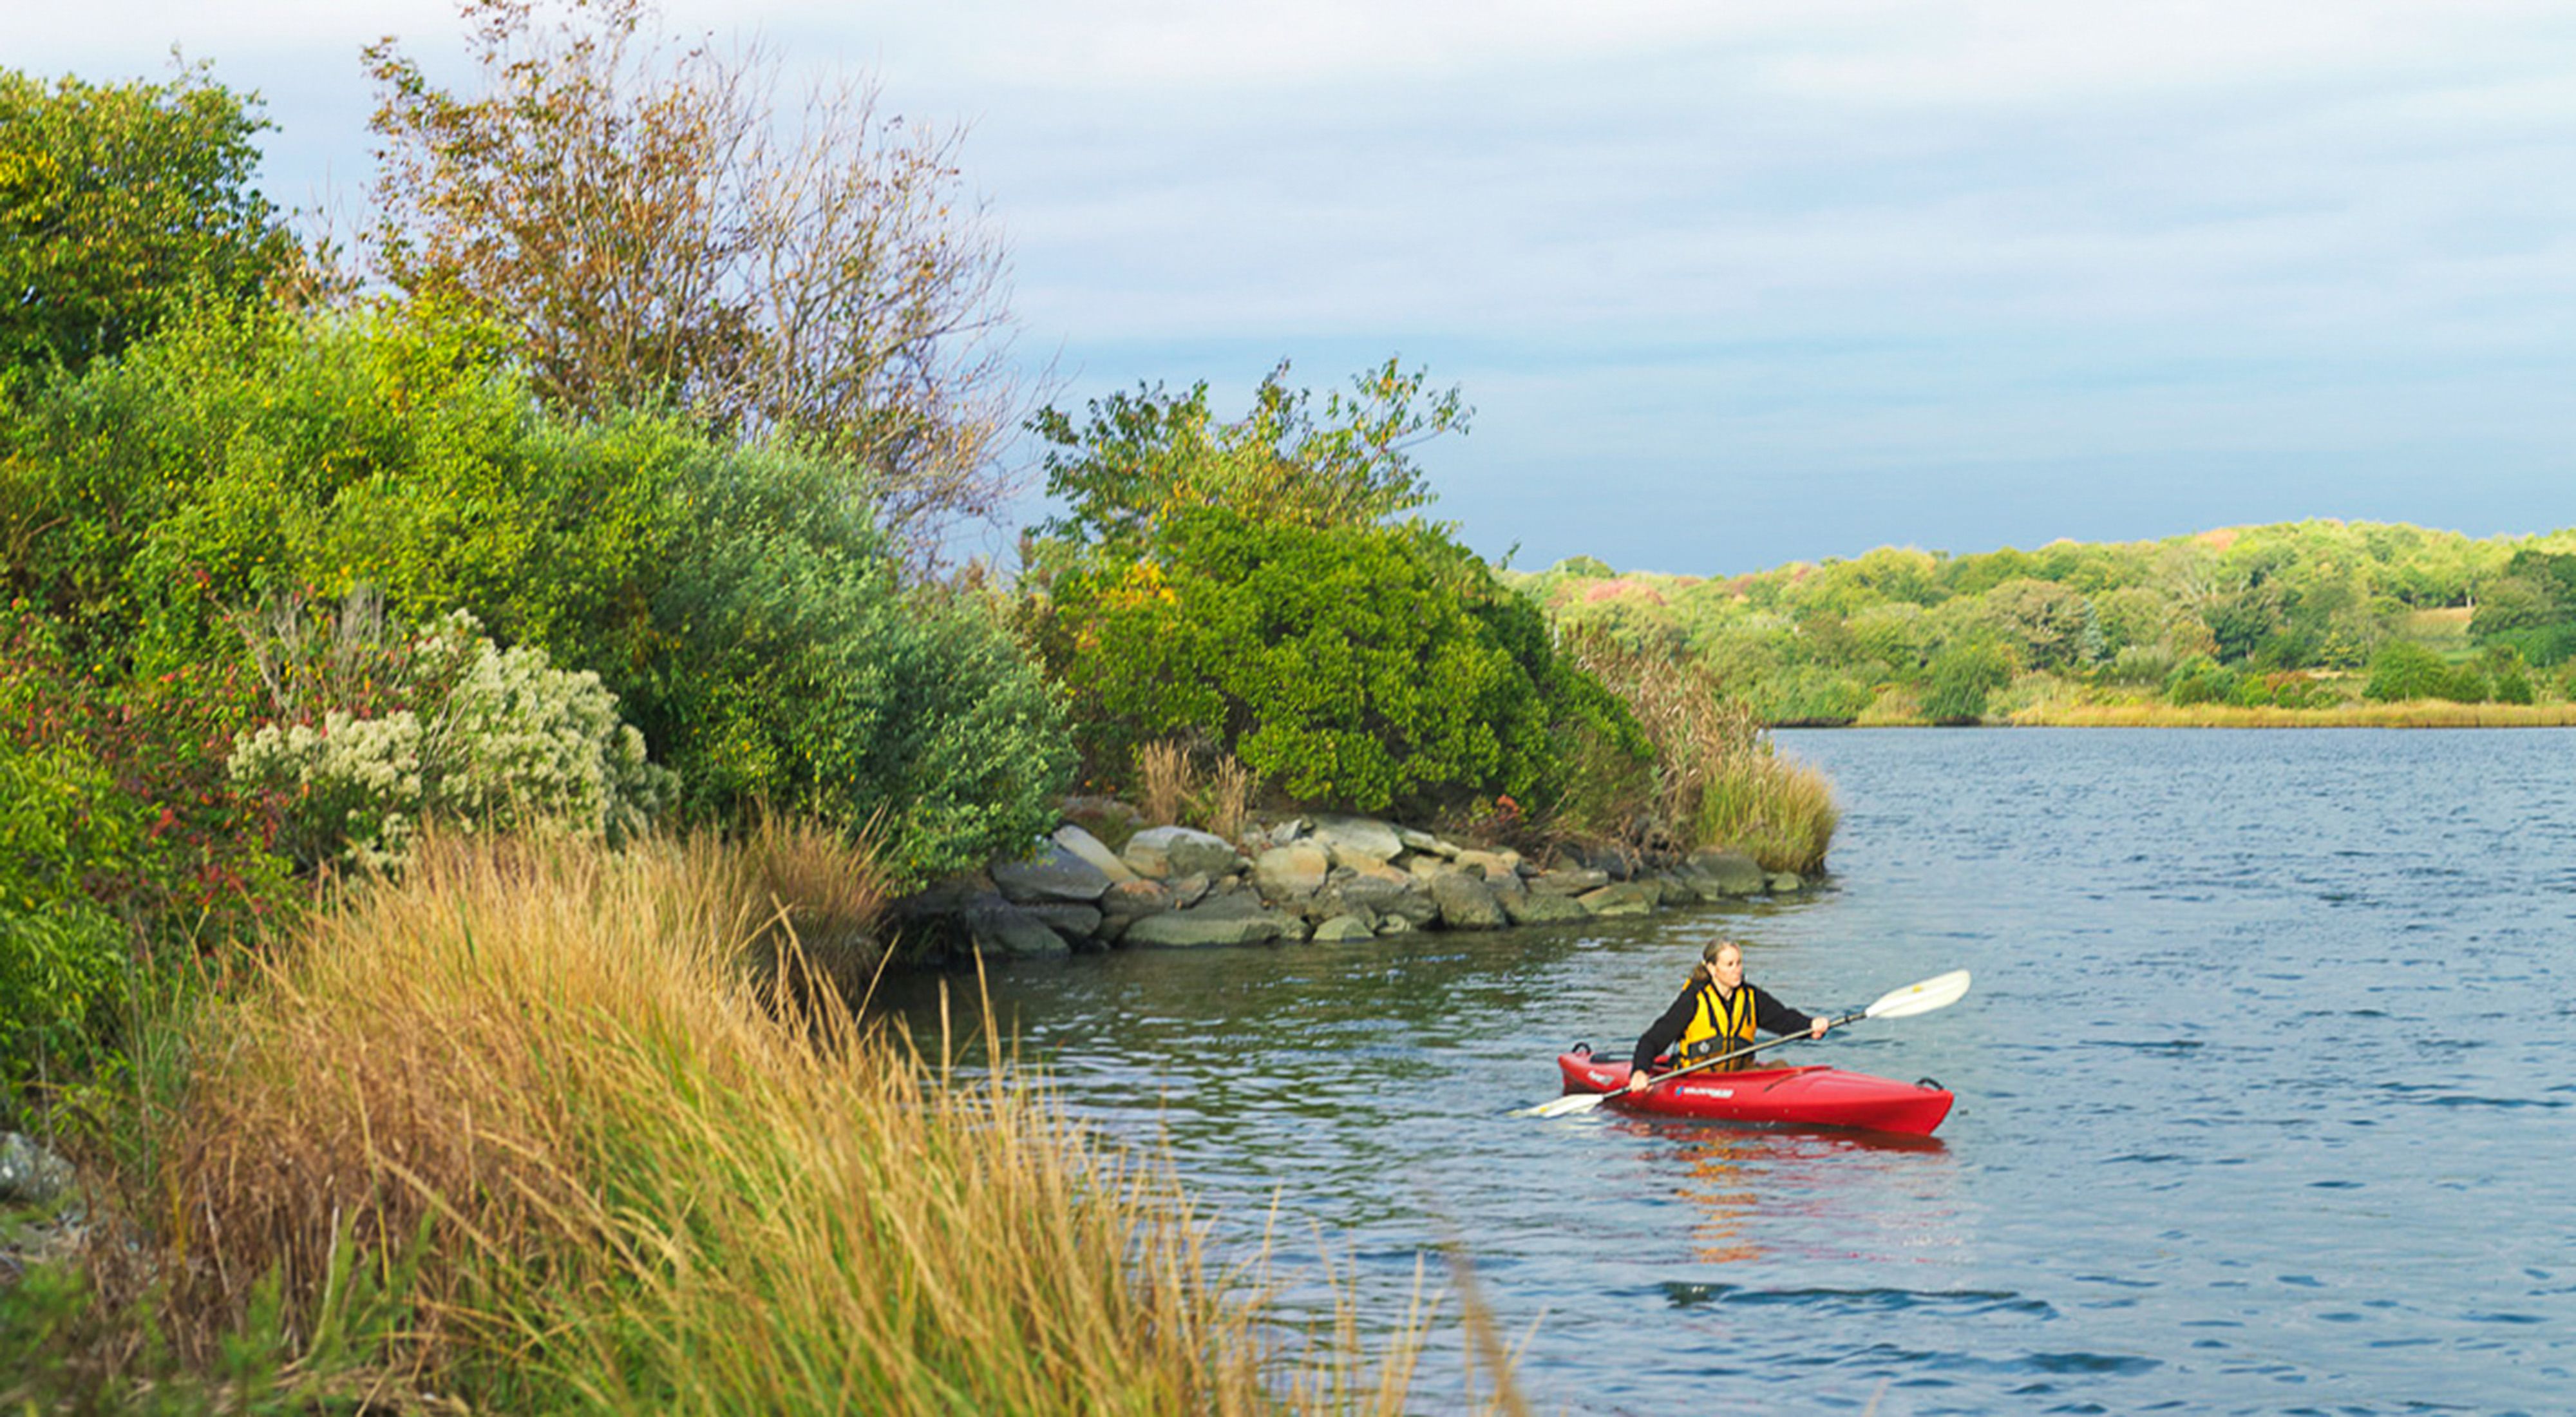 A kayaker paddles along a shoreline with green shrubs growing up to the rocks at the water's edge.